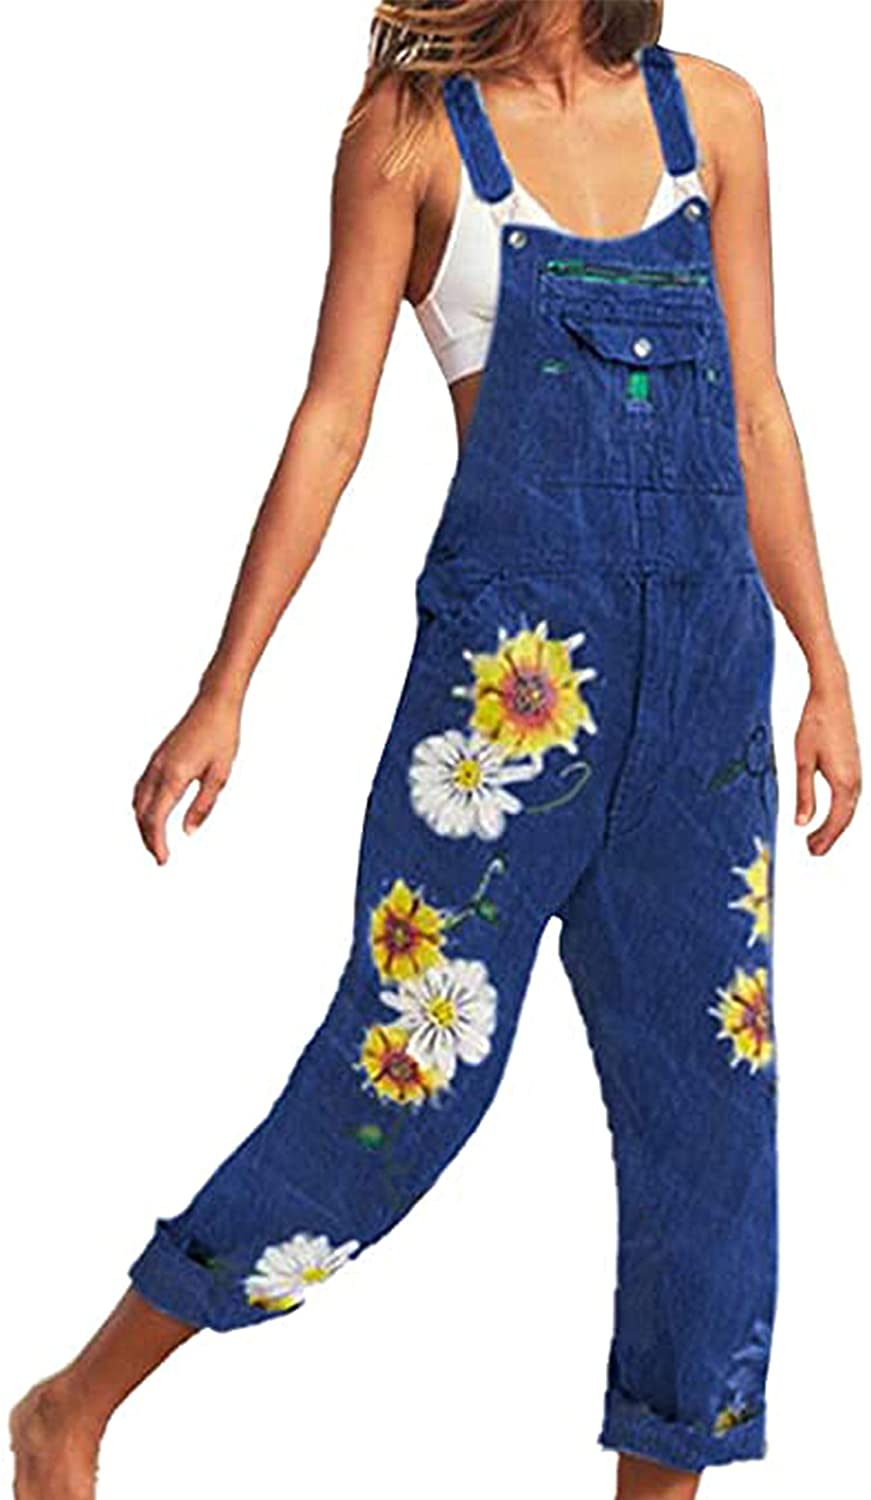 Yeokou Womens Casual Denim Bib Cropped Overalls Pant Jeans Jumpsuits